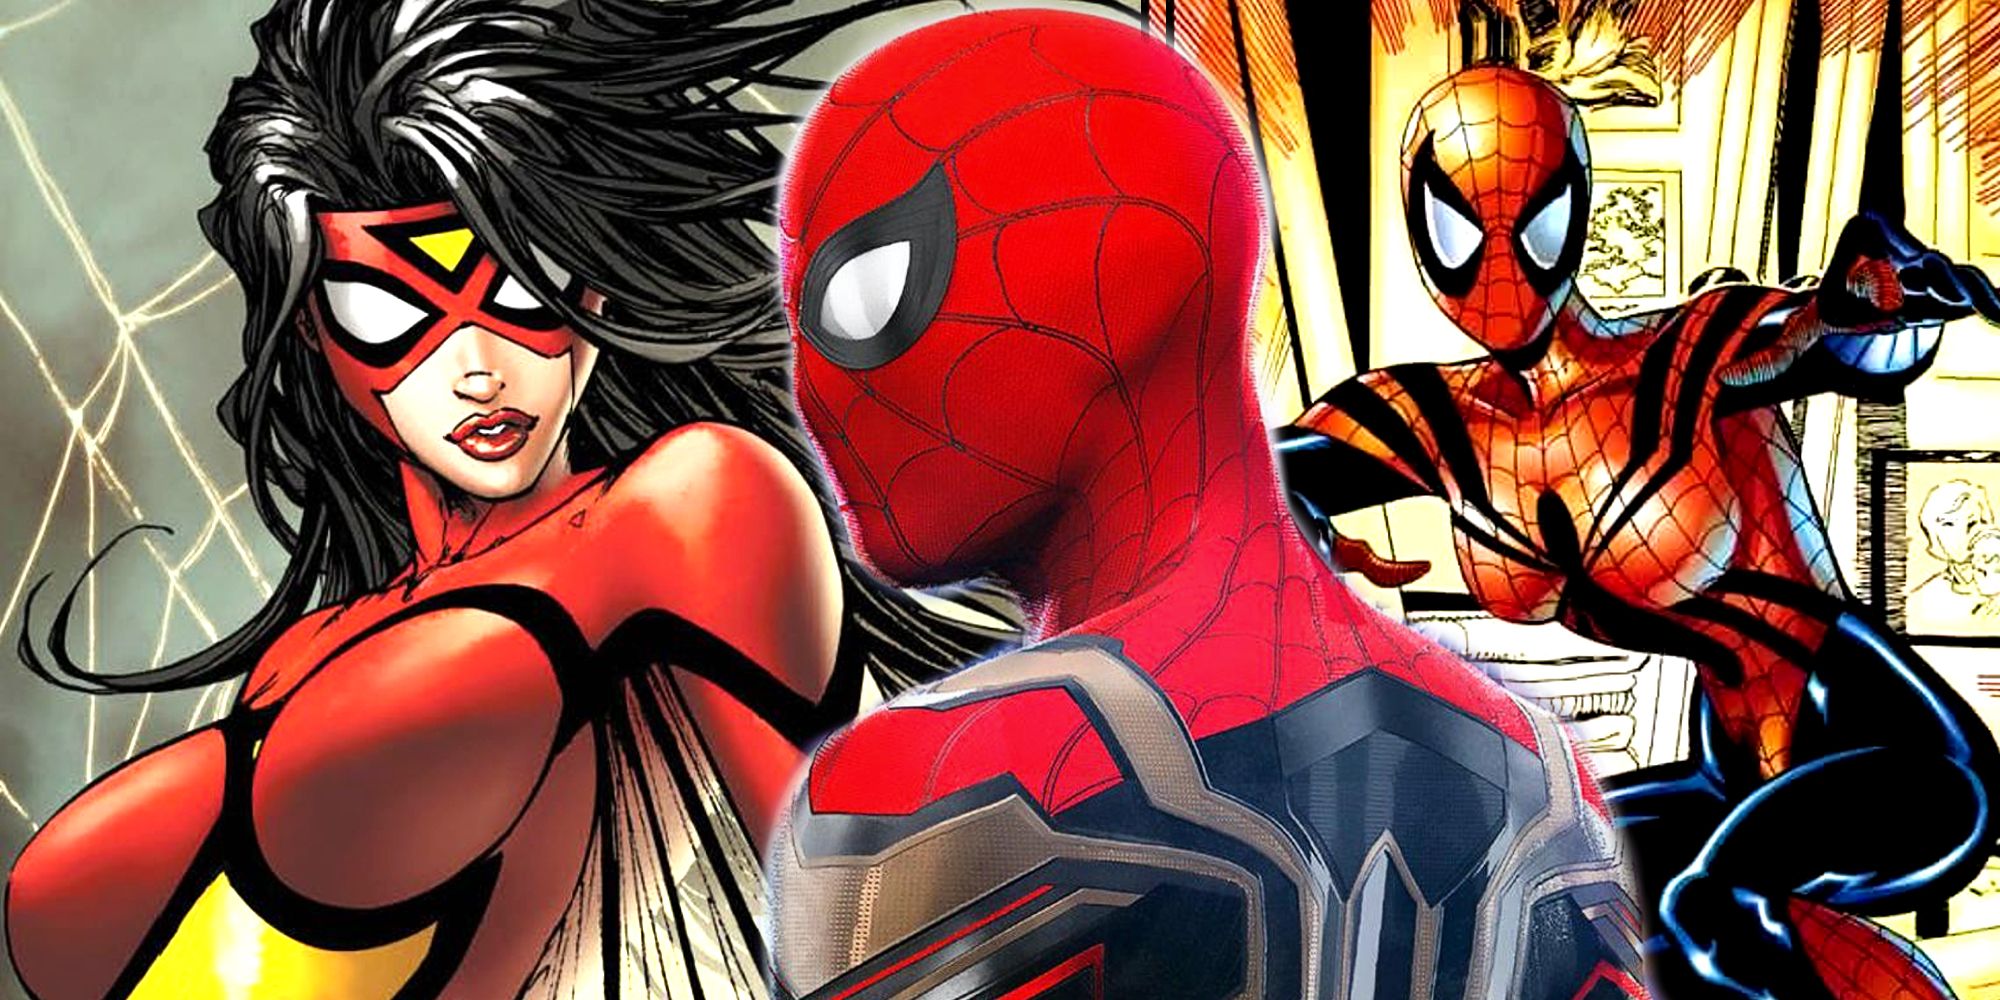 Spider-Man, Spider-Girl, and Spider-Woman in No Way Home